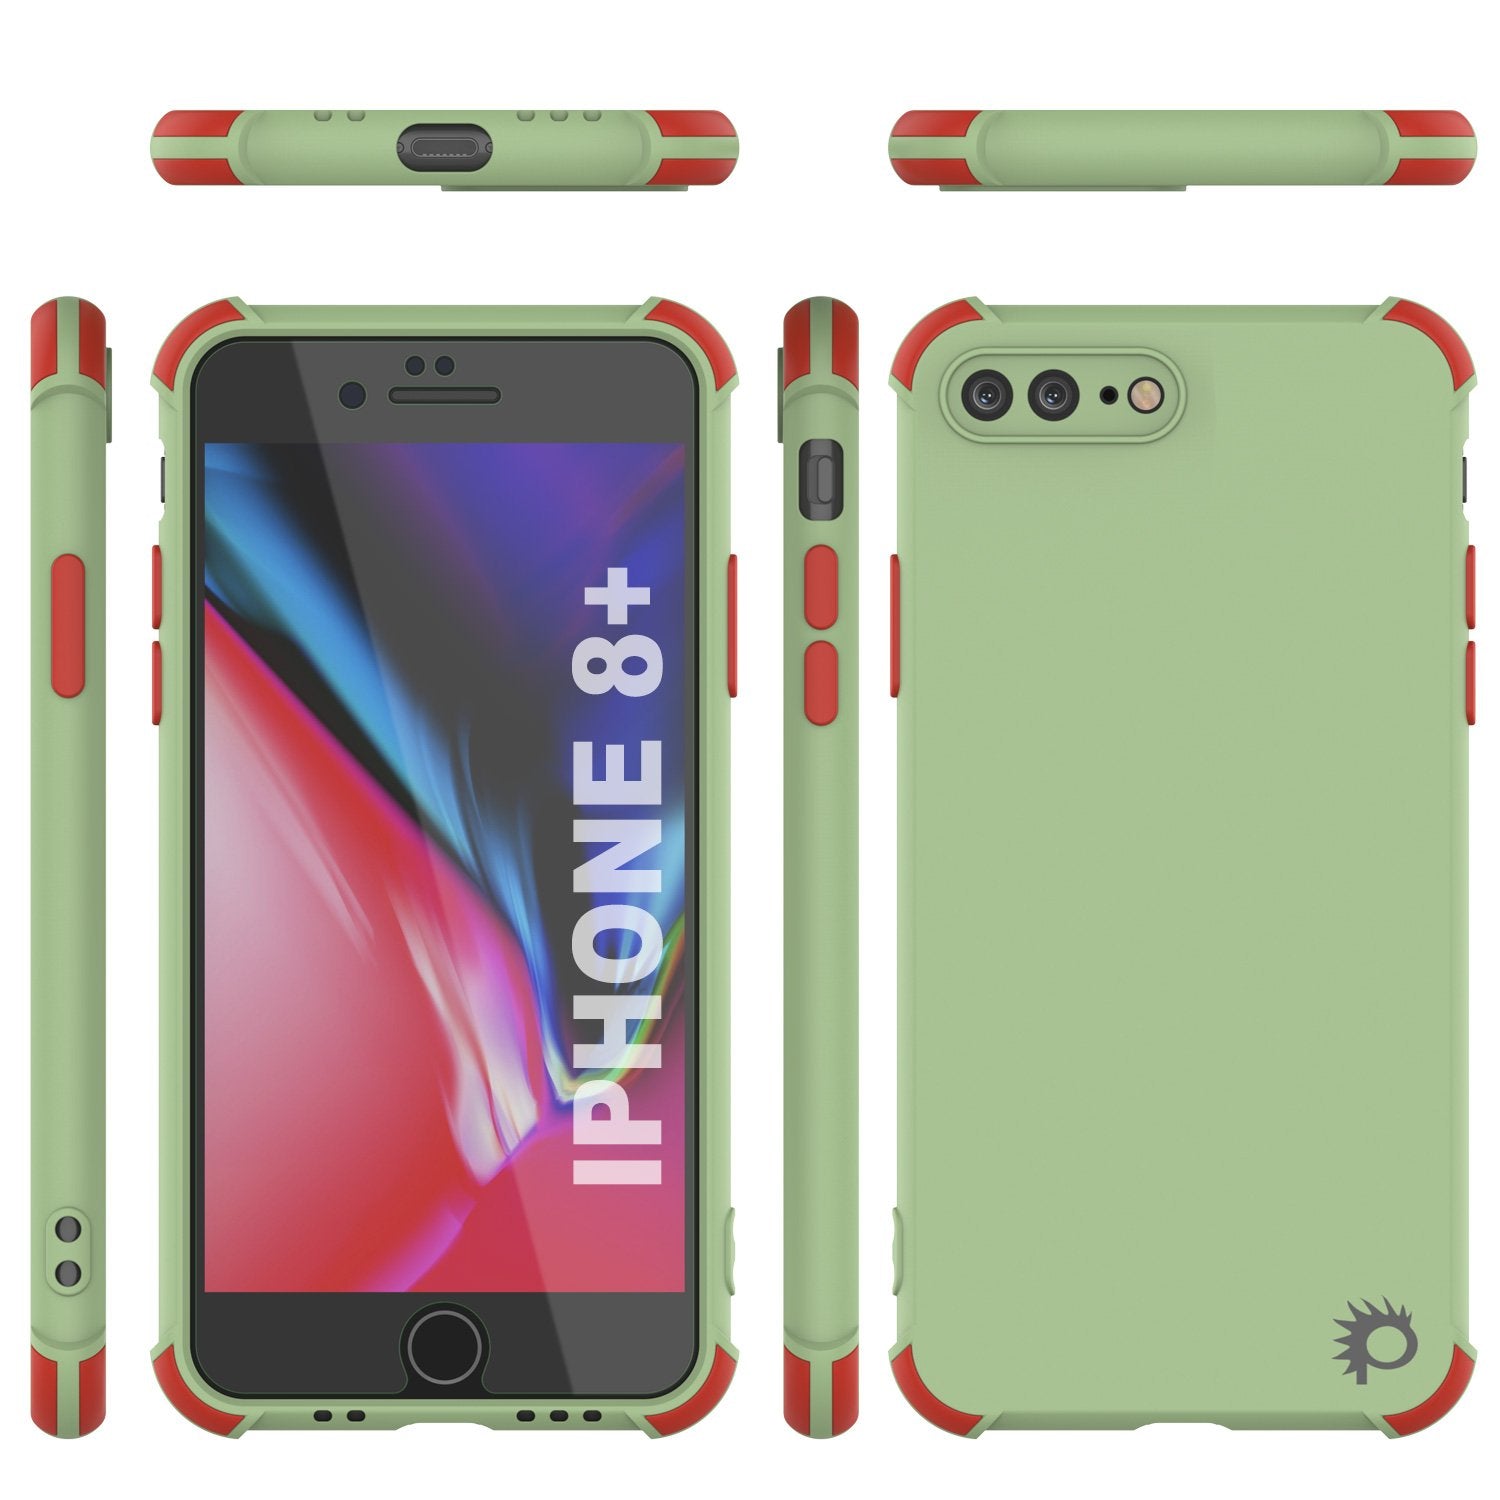 Punkcase Protective & Lightweight TPU Case [Sunshine Series] for iPhone 8+ Plus [Light Green]